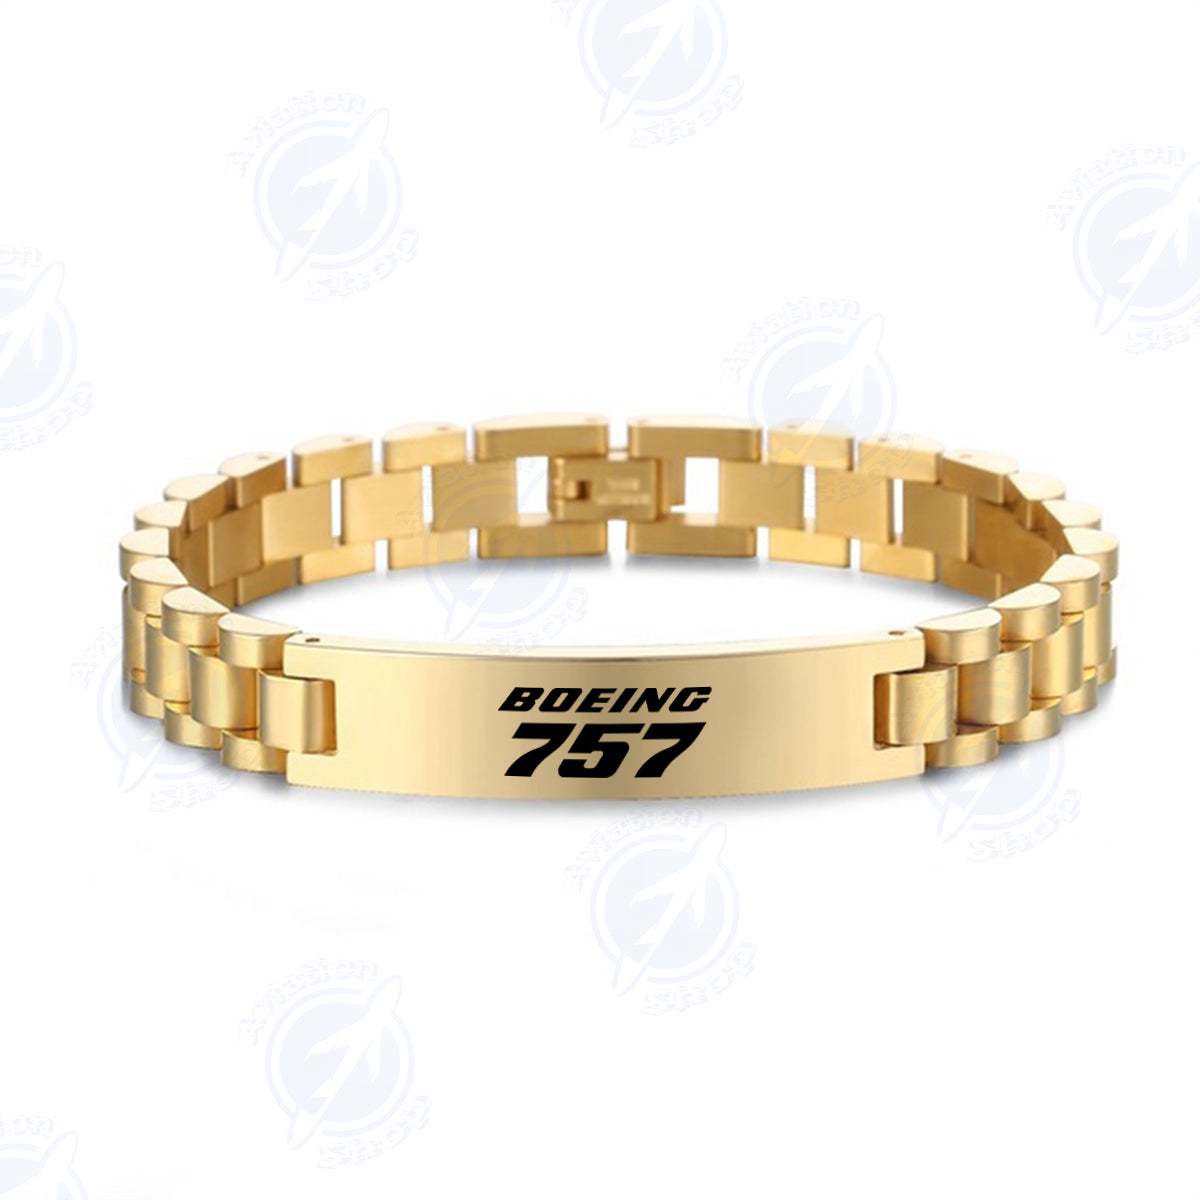 Boeing 757 & Text Designed Stainless Steel Chain Bracelets